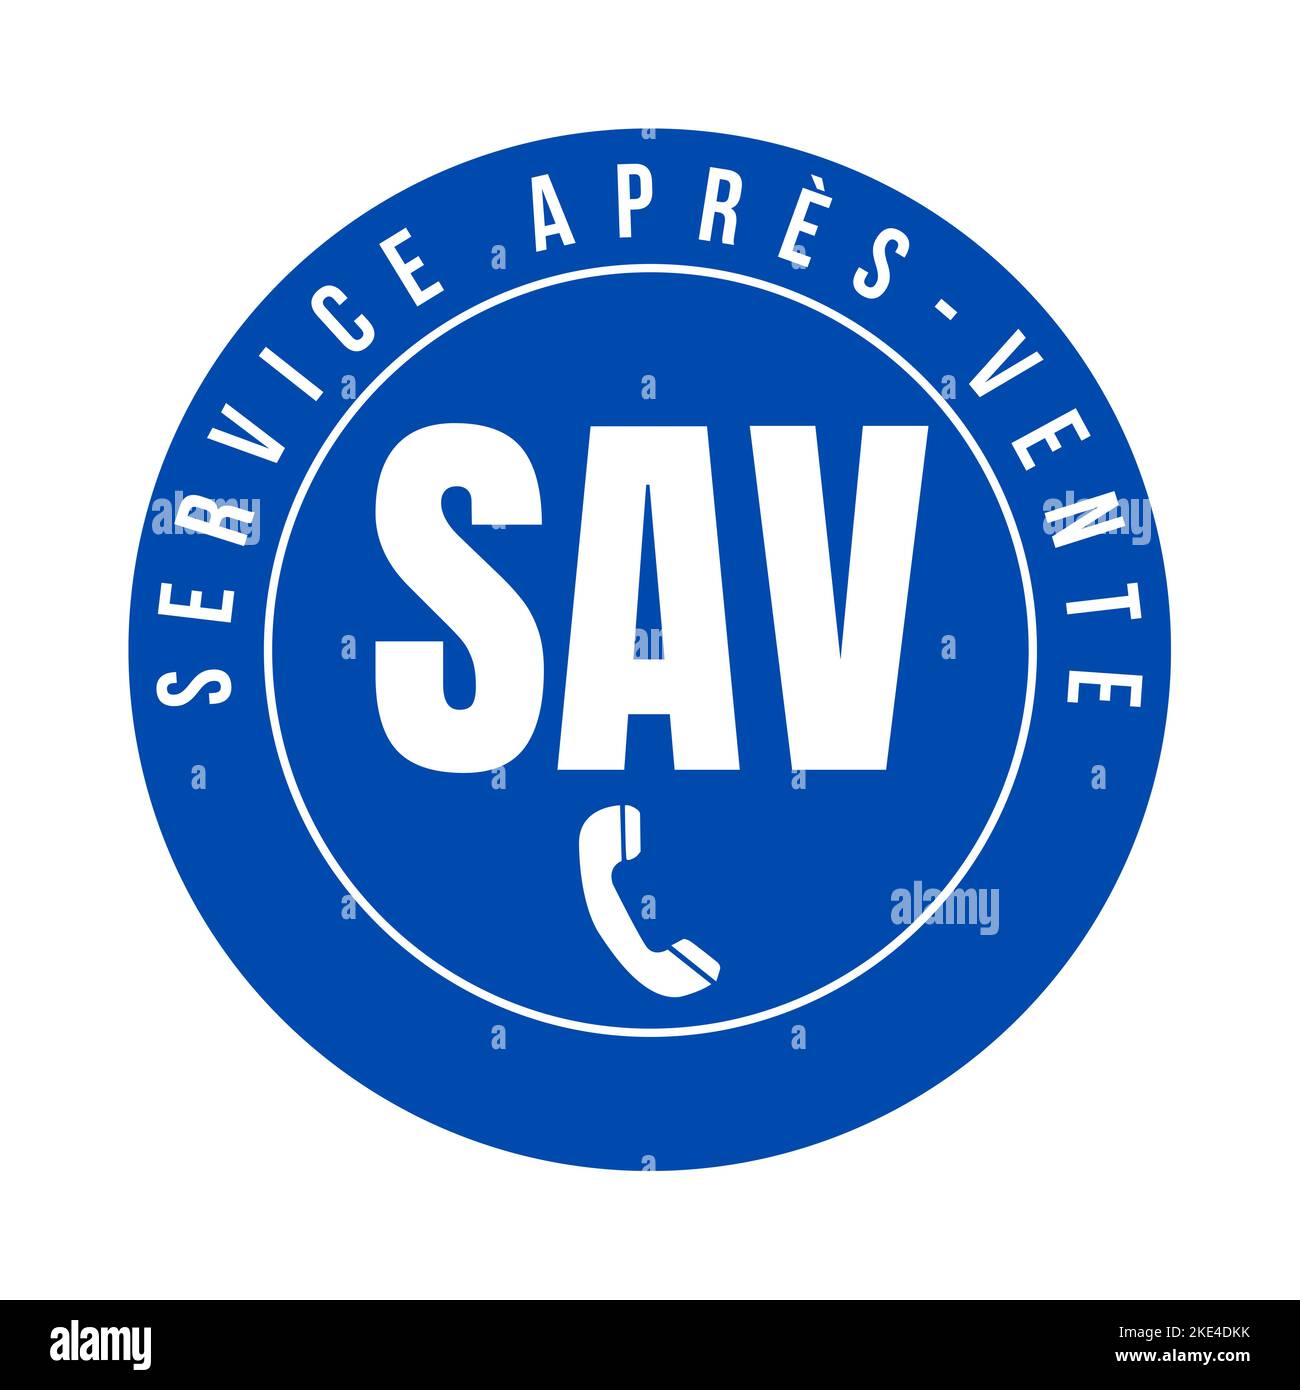 After-sales service symbol icon called SAV service apres-vente in French language Stock Photo